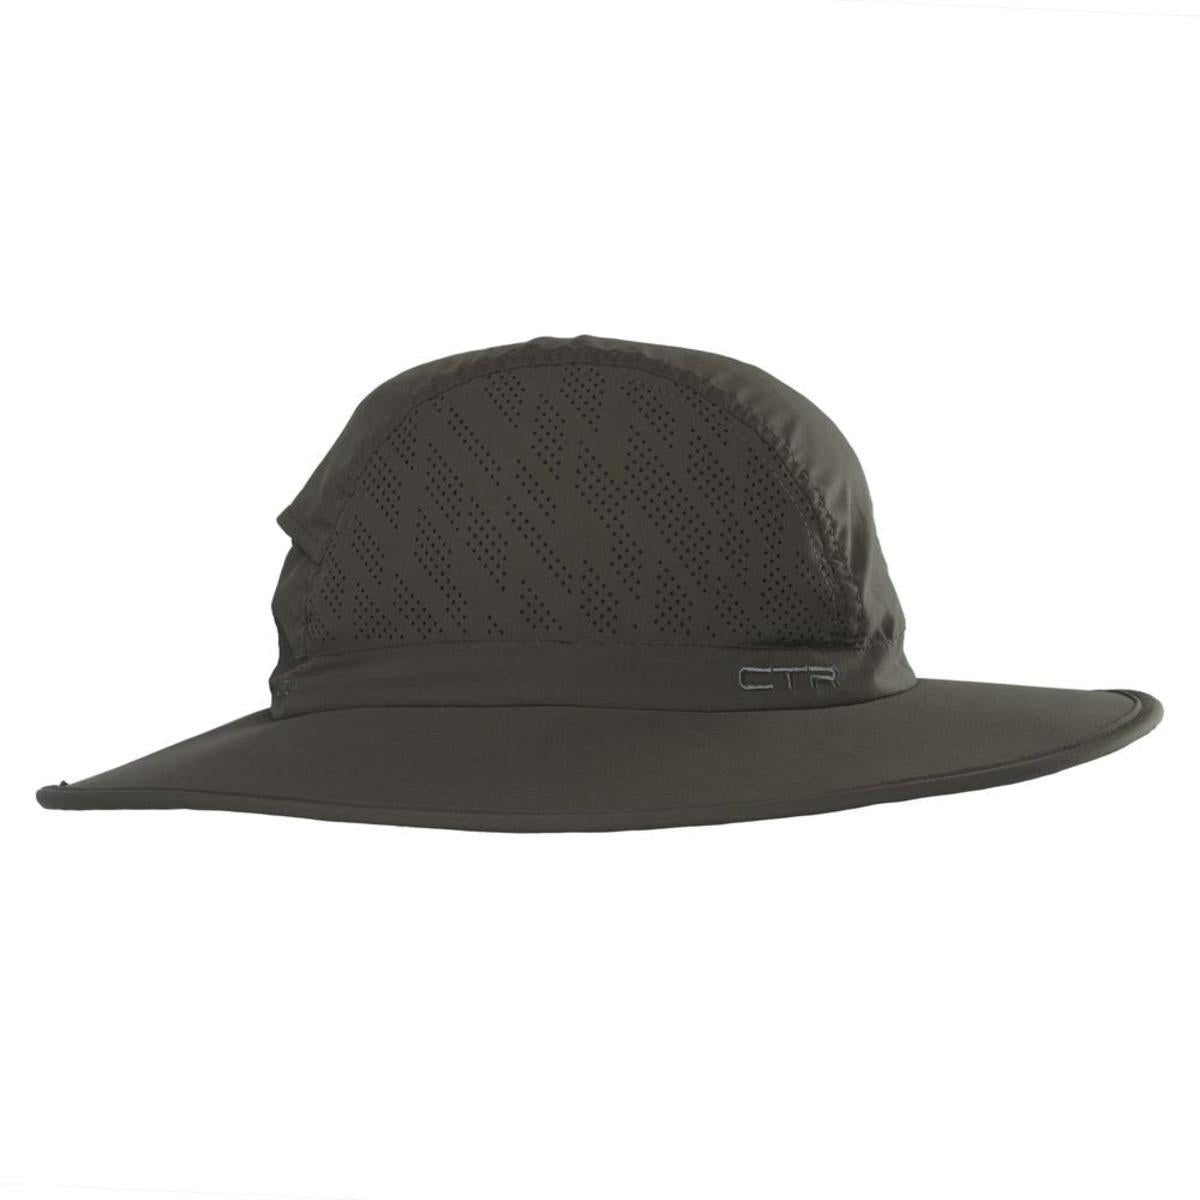 CTR by Chaos Summit Expedition Hat